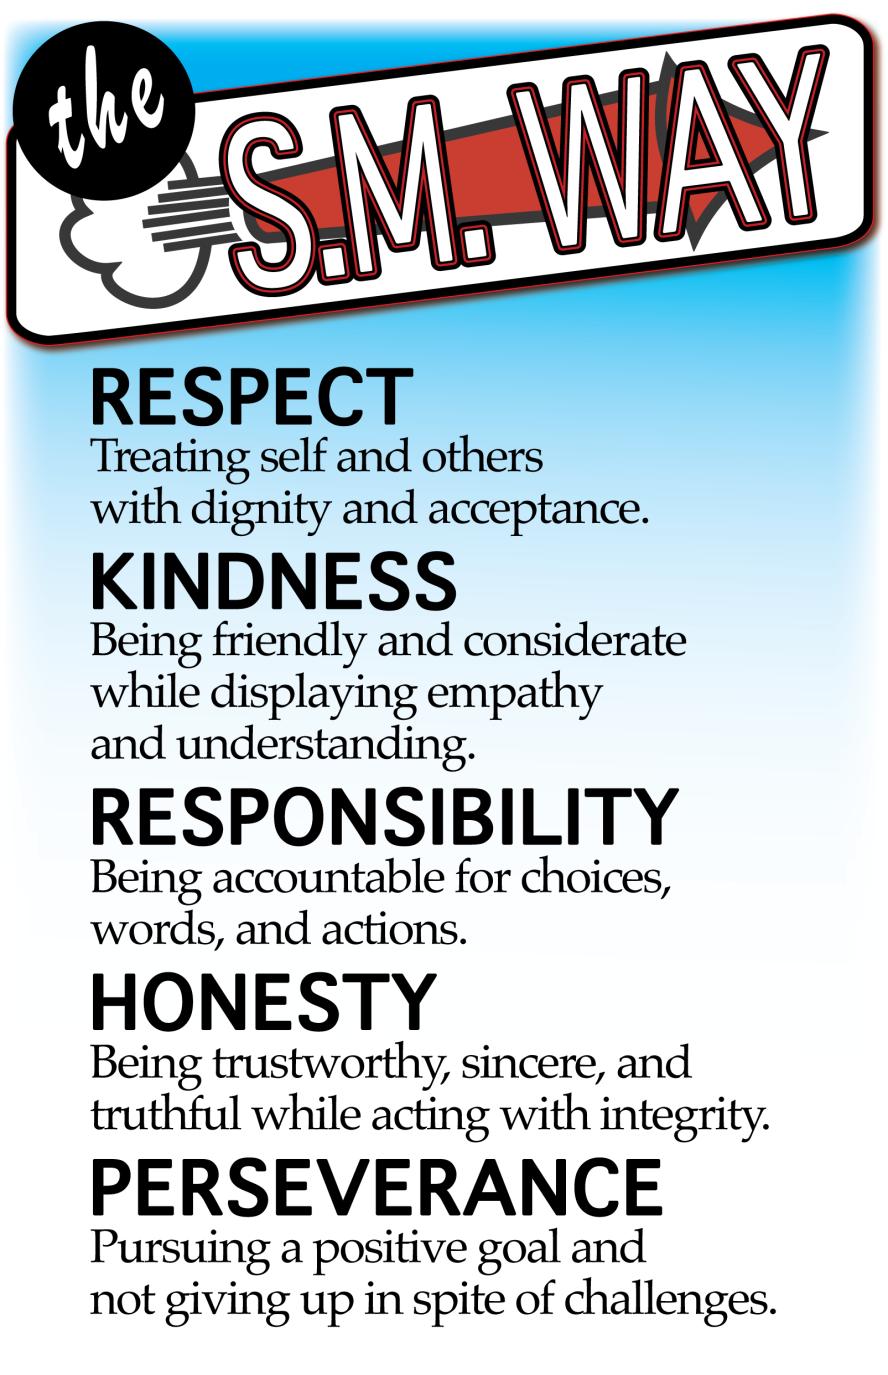 Campers Code of Conduct BEHAVIOR CONTRACT To ensure all campers have a positive experience at Camp, campers will be required to follow the Code of Conduct and sign a Behavior Contract along with